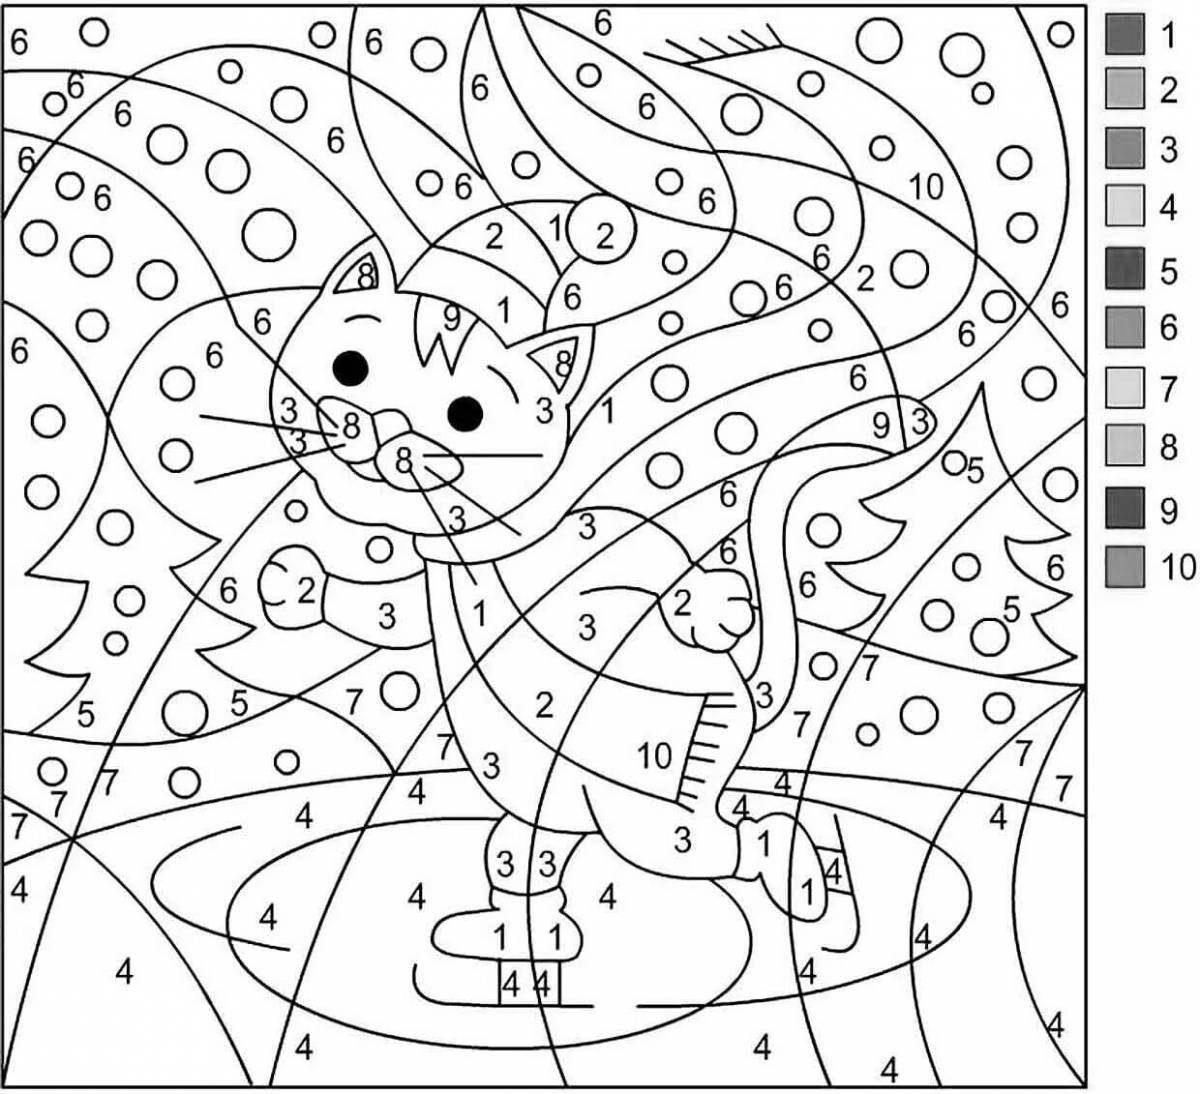 Fun coloring by numbers for children up to 10 years old